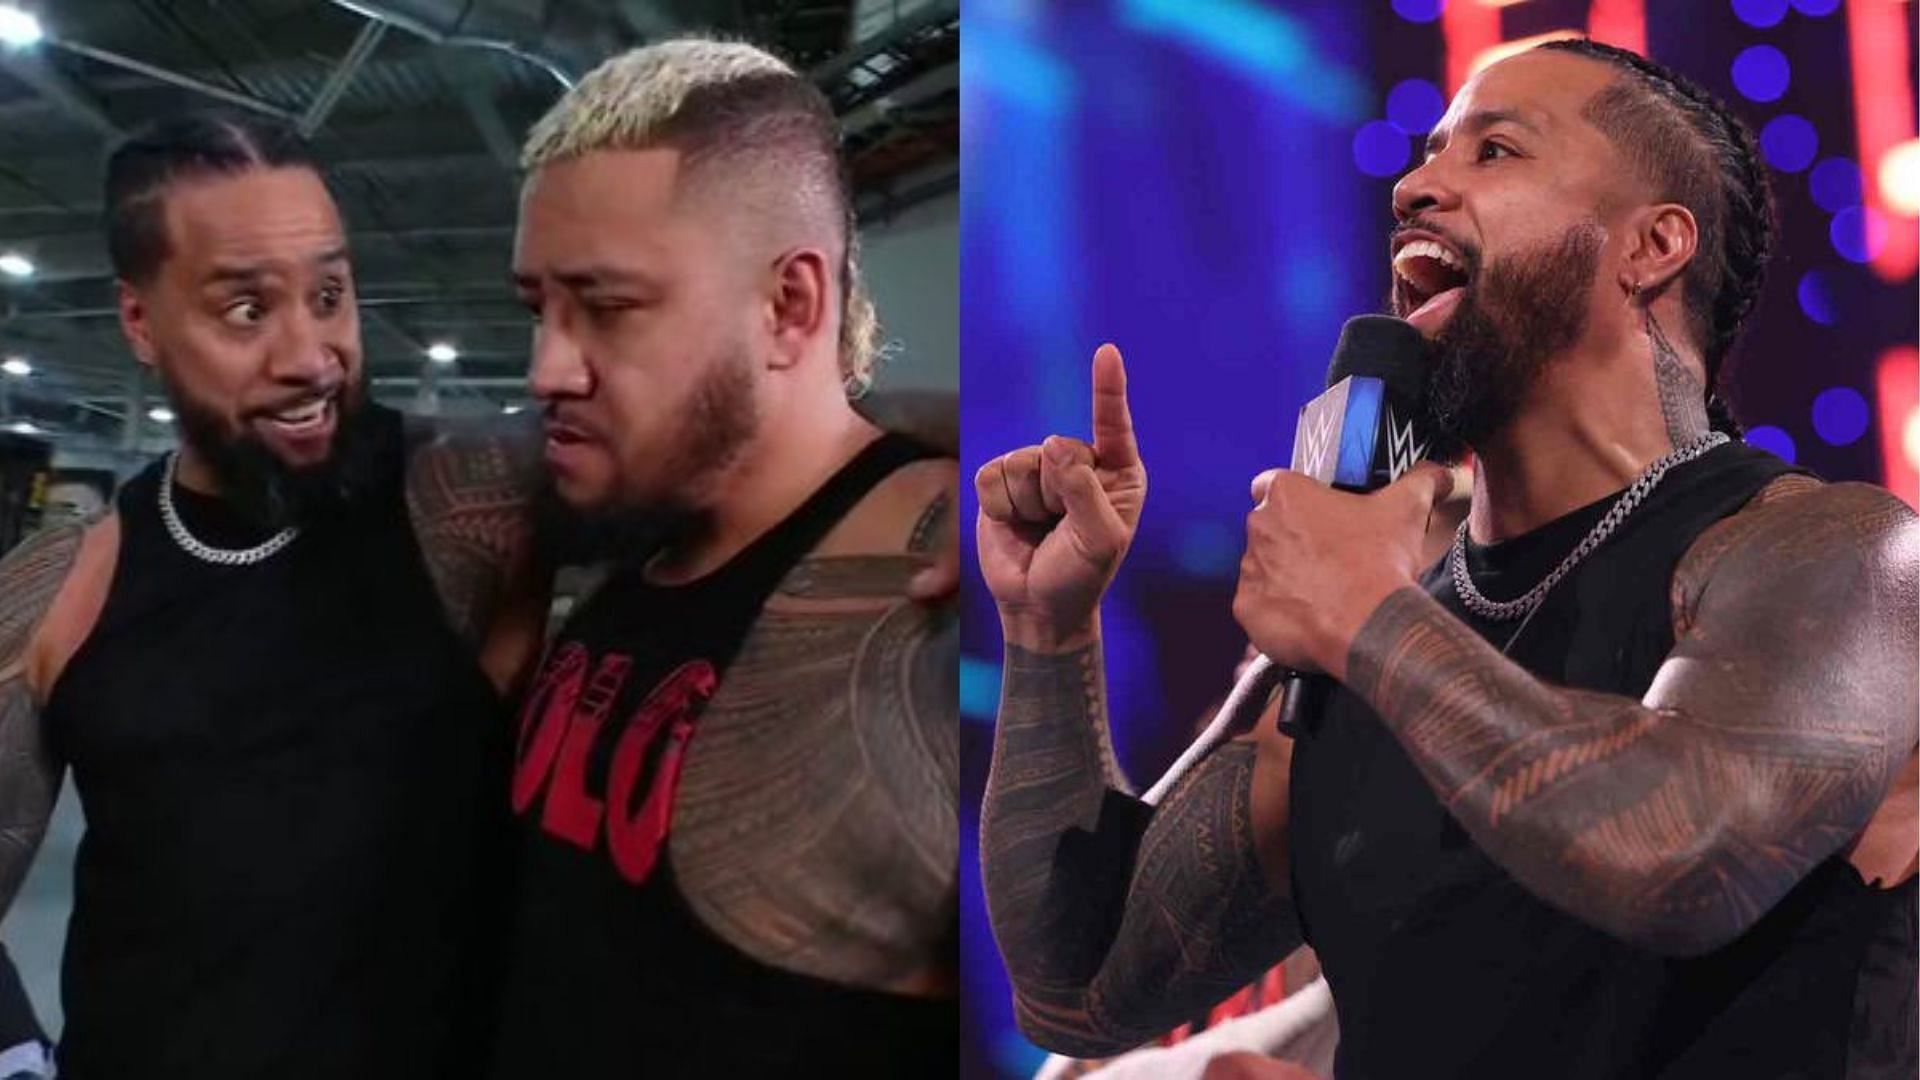 Jimmy Uso and Solo Sikoa will team up against John Cena and LA Knight at Fastlane